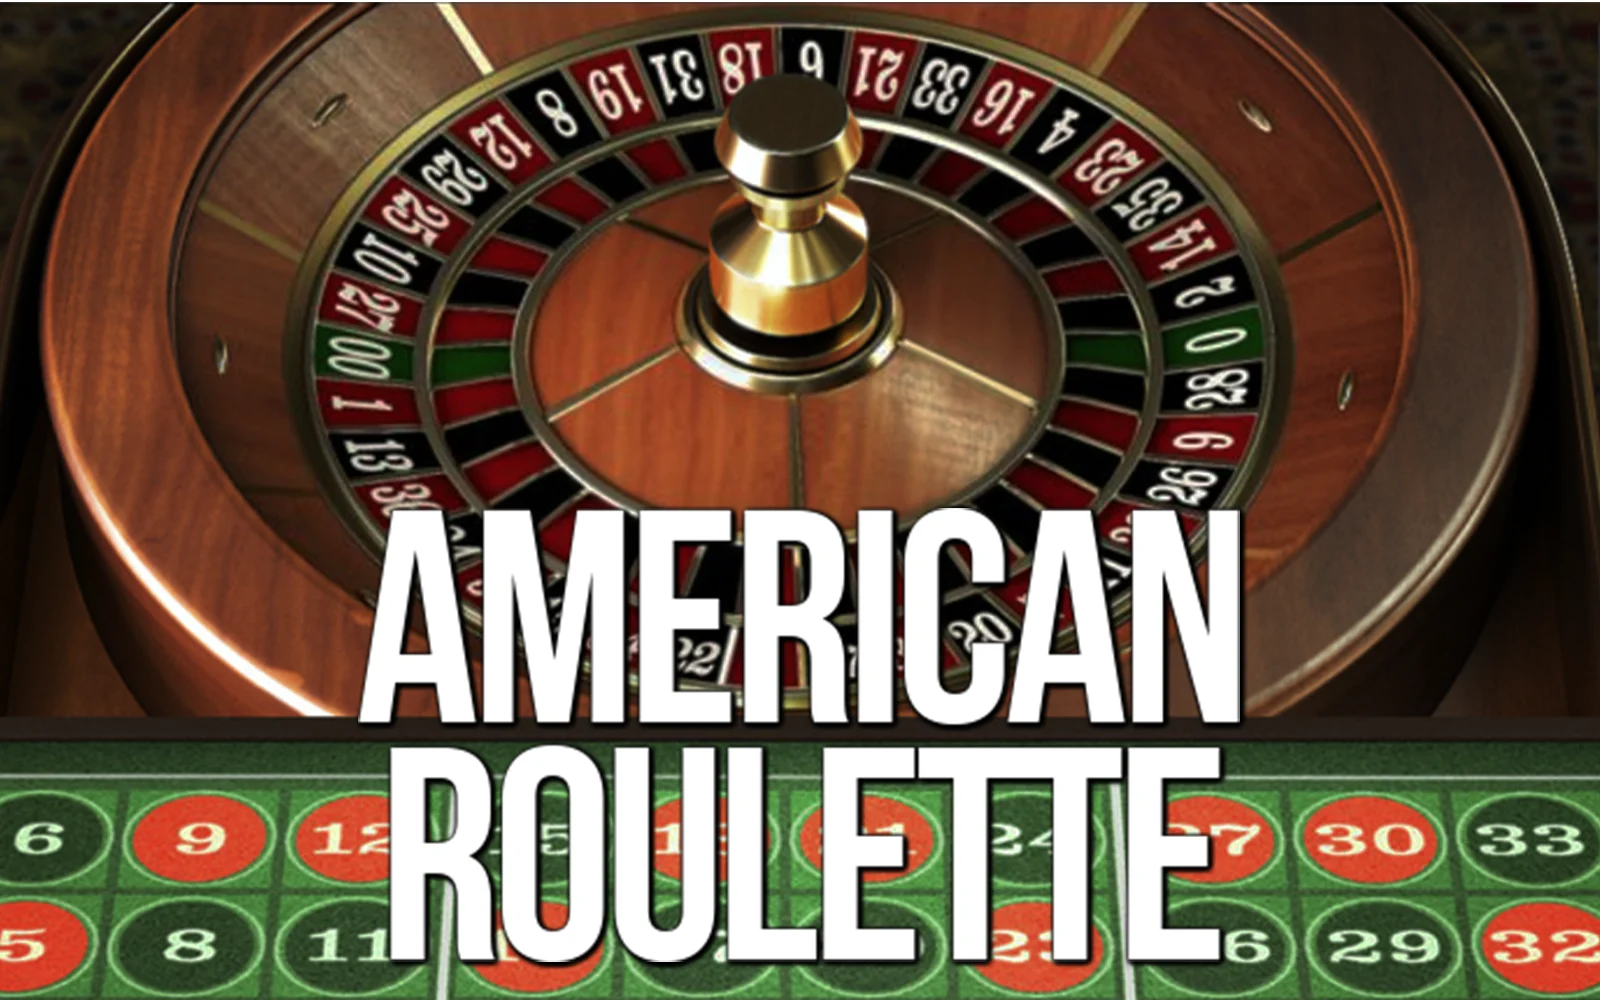 Play American Roulette on Starcasino.be online casino